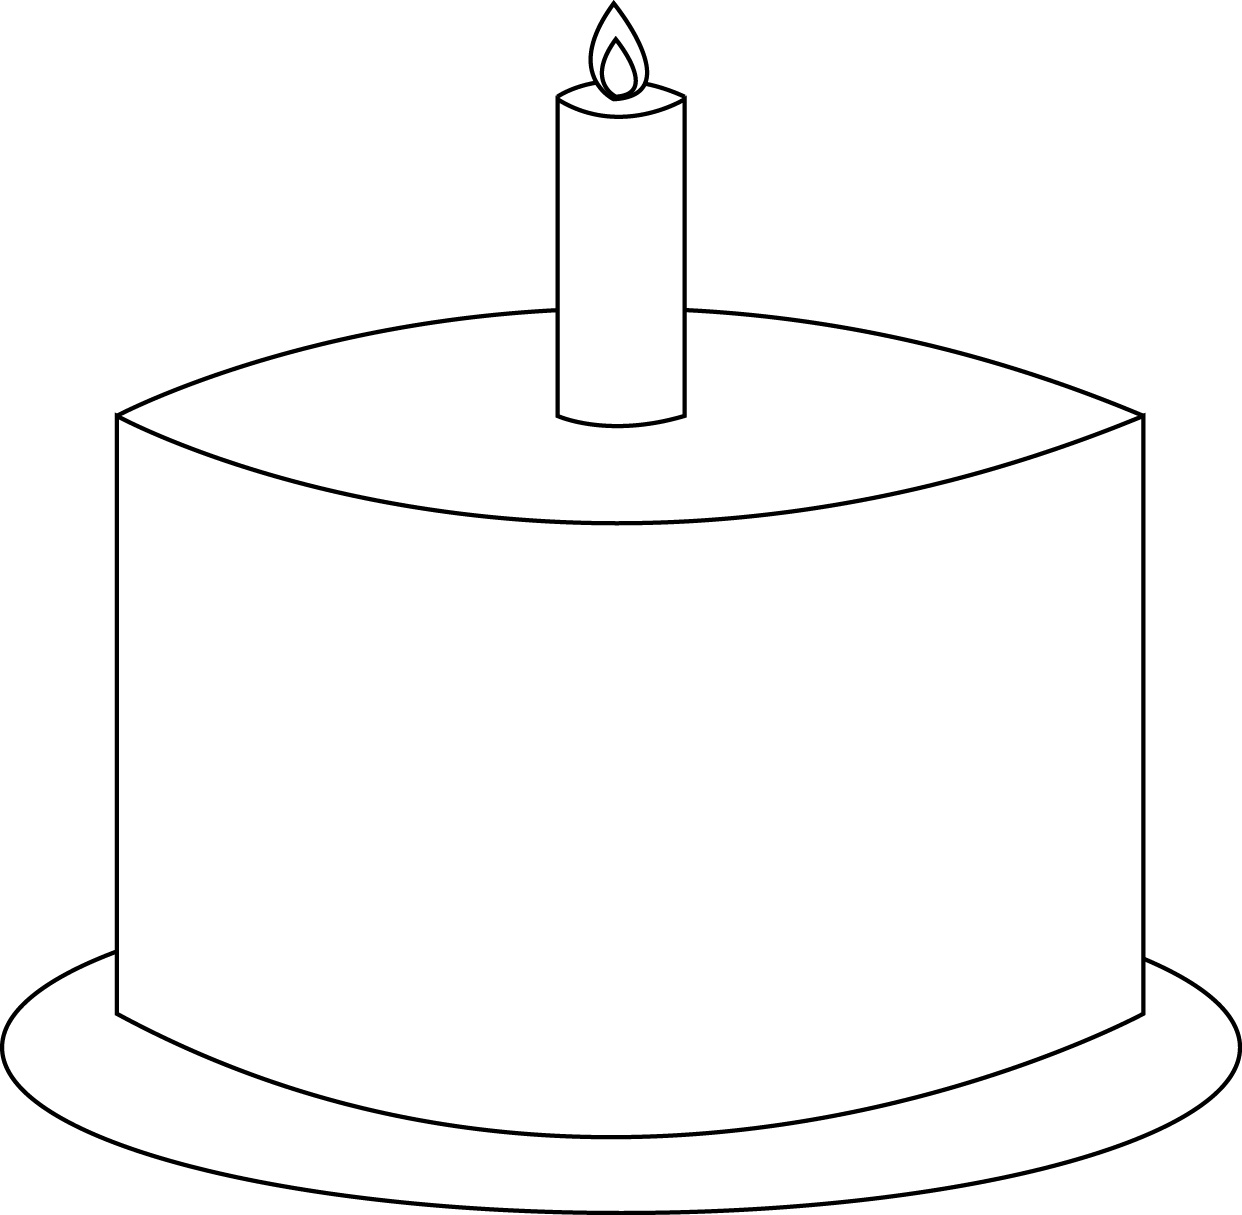 5-best-images-of-birthday-cake-printable-template-birthday-cake-cut